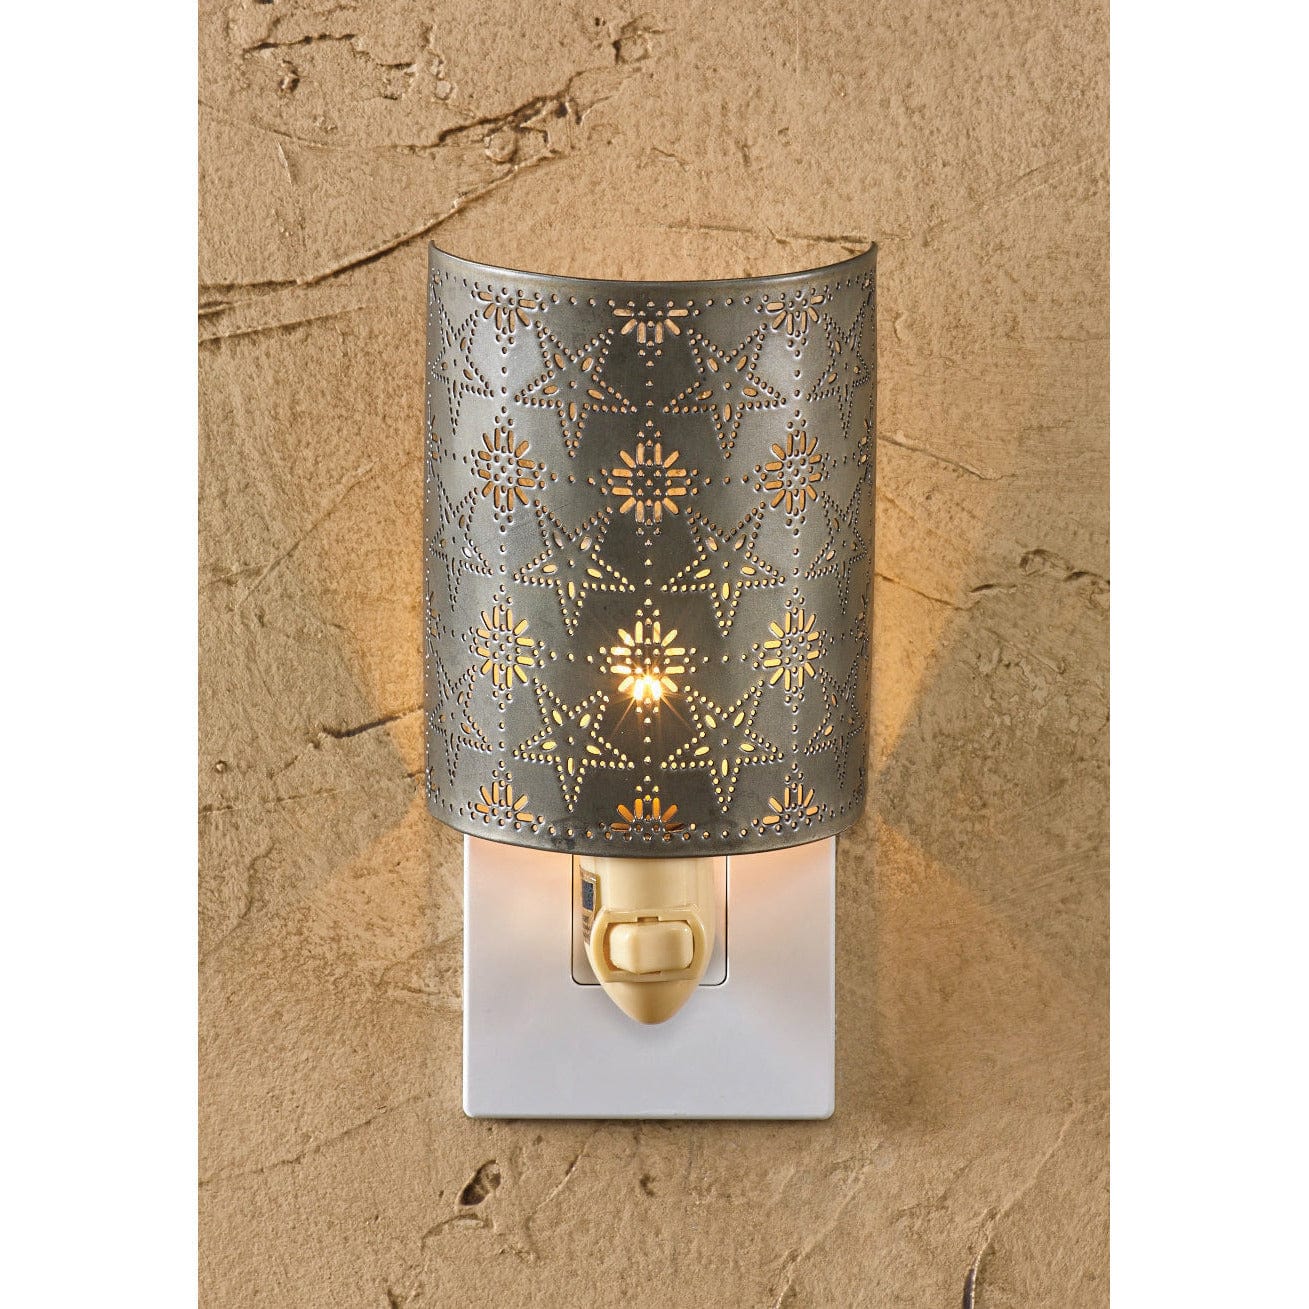 Tin Star Punched Night Light-Park Designs-The Village Merchant